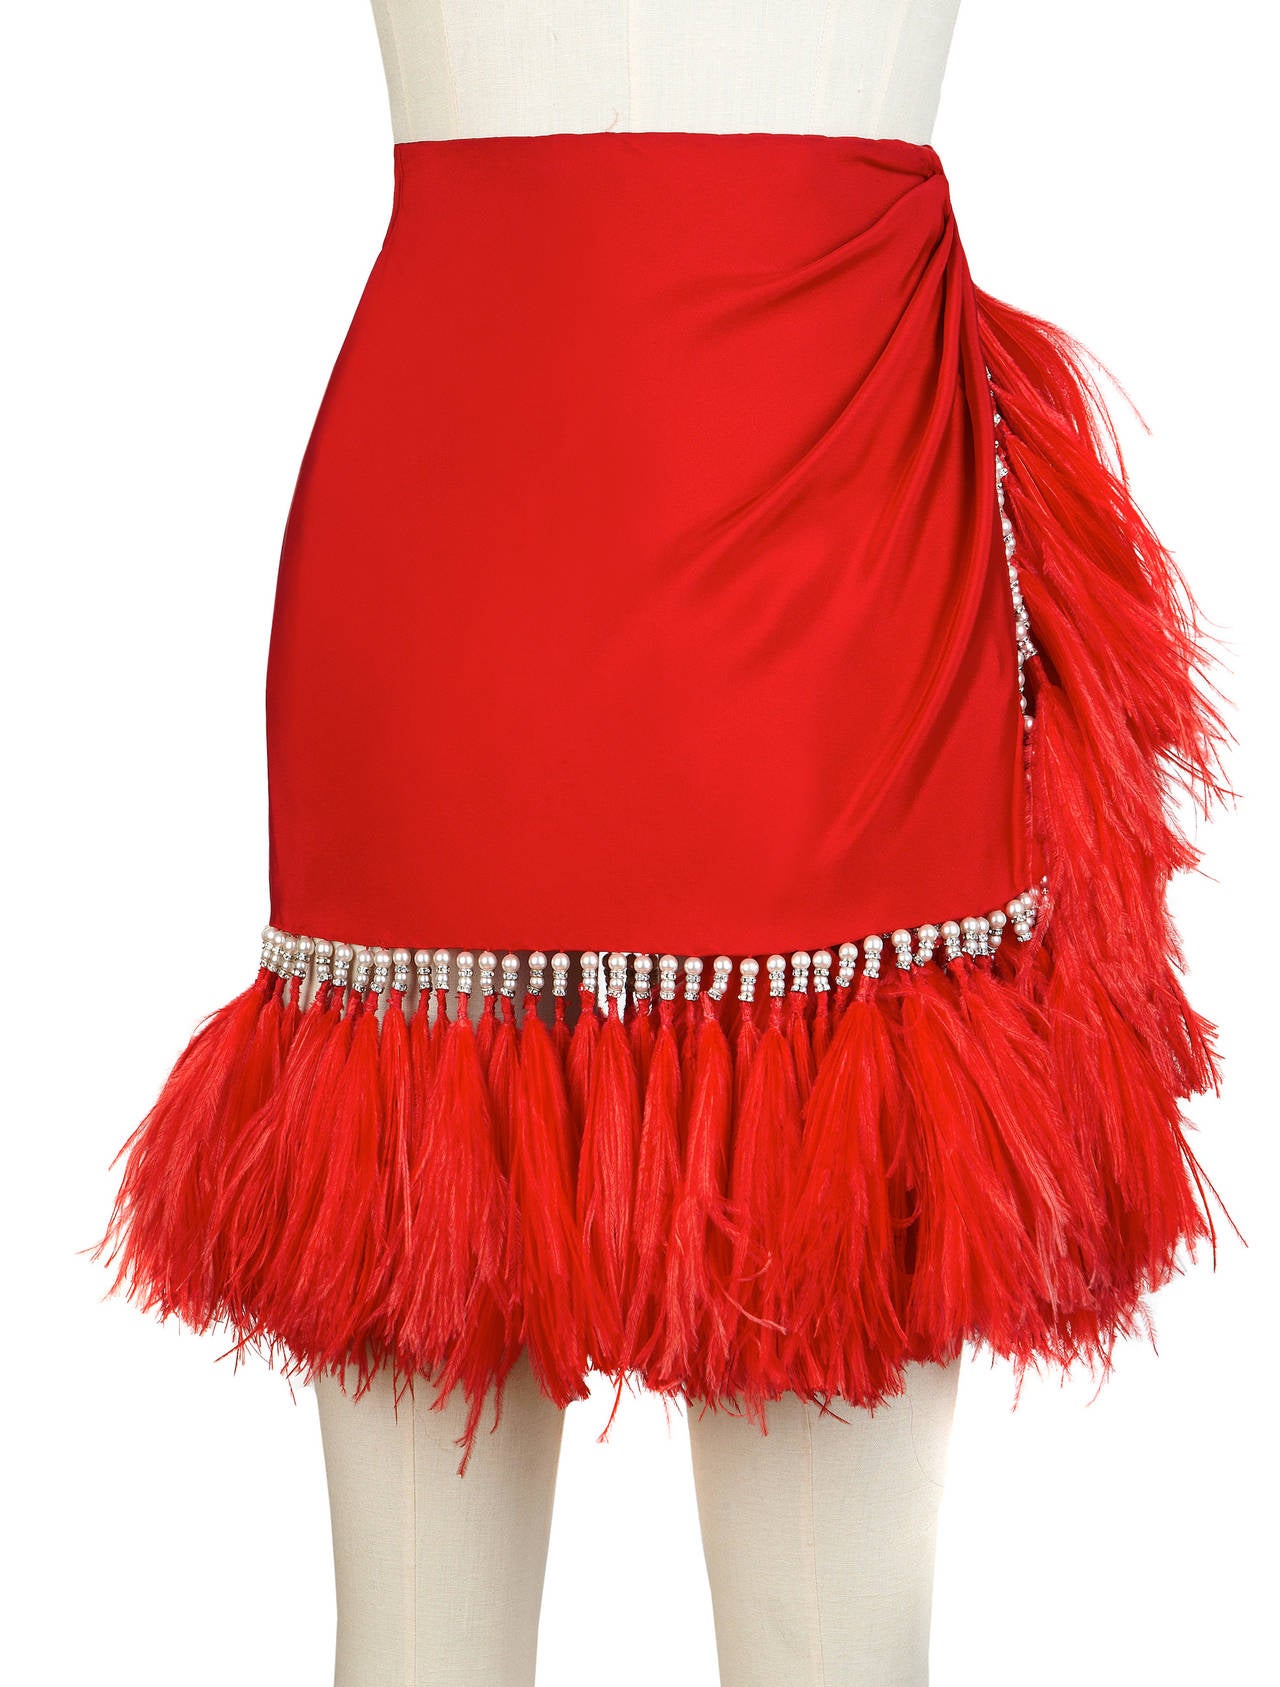 An important Atelier Versace red silk Maribou feather wrap skirt with faux pearl and strass embroidery from the Fall 1990 Atelier Versace, shown at The Ritz in Paris.

Marked an Italian 38.

Manufacturer - Alias S.p.a.